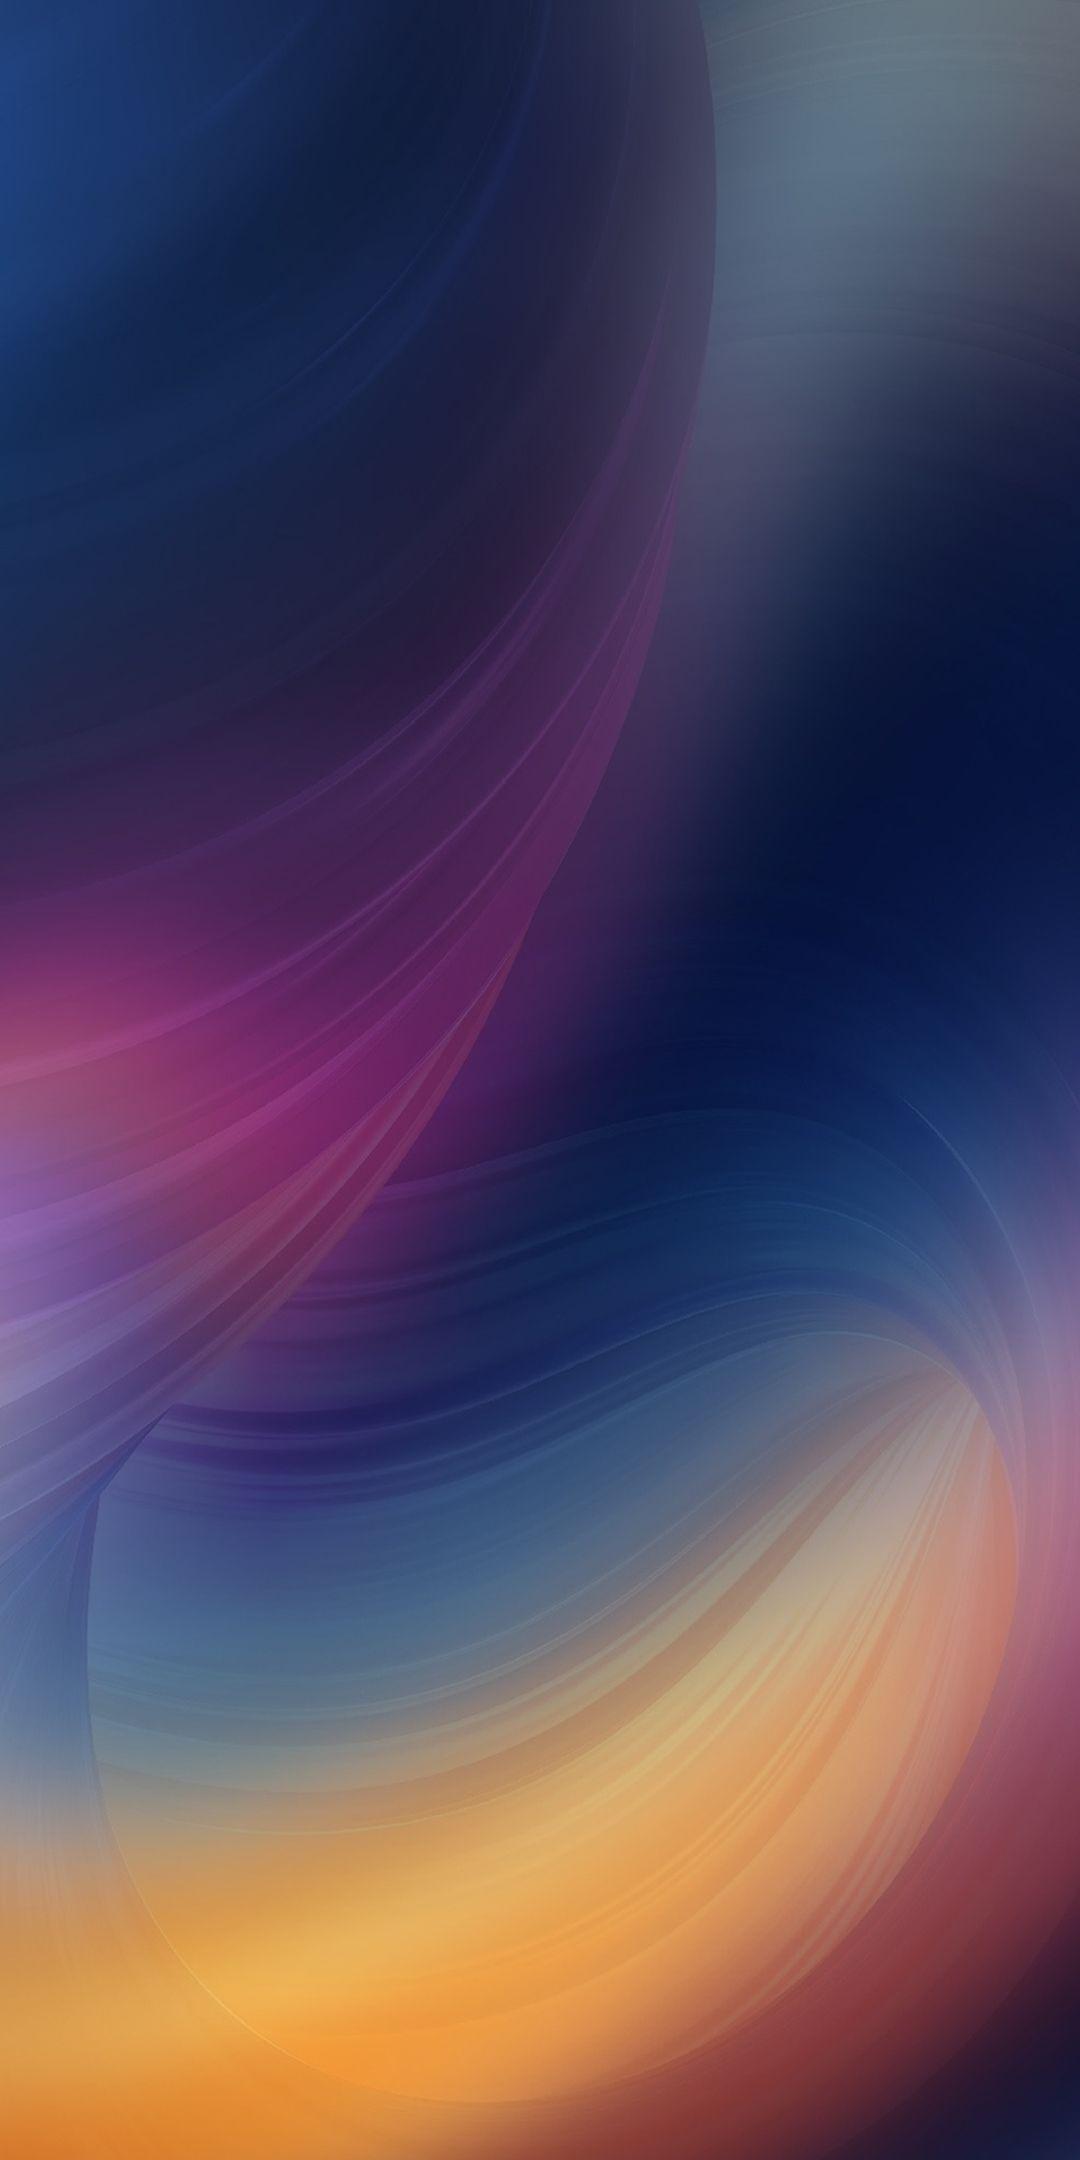 Huawei Mate 10 Pro Wallpapers 05 of 10 with Abstract Light